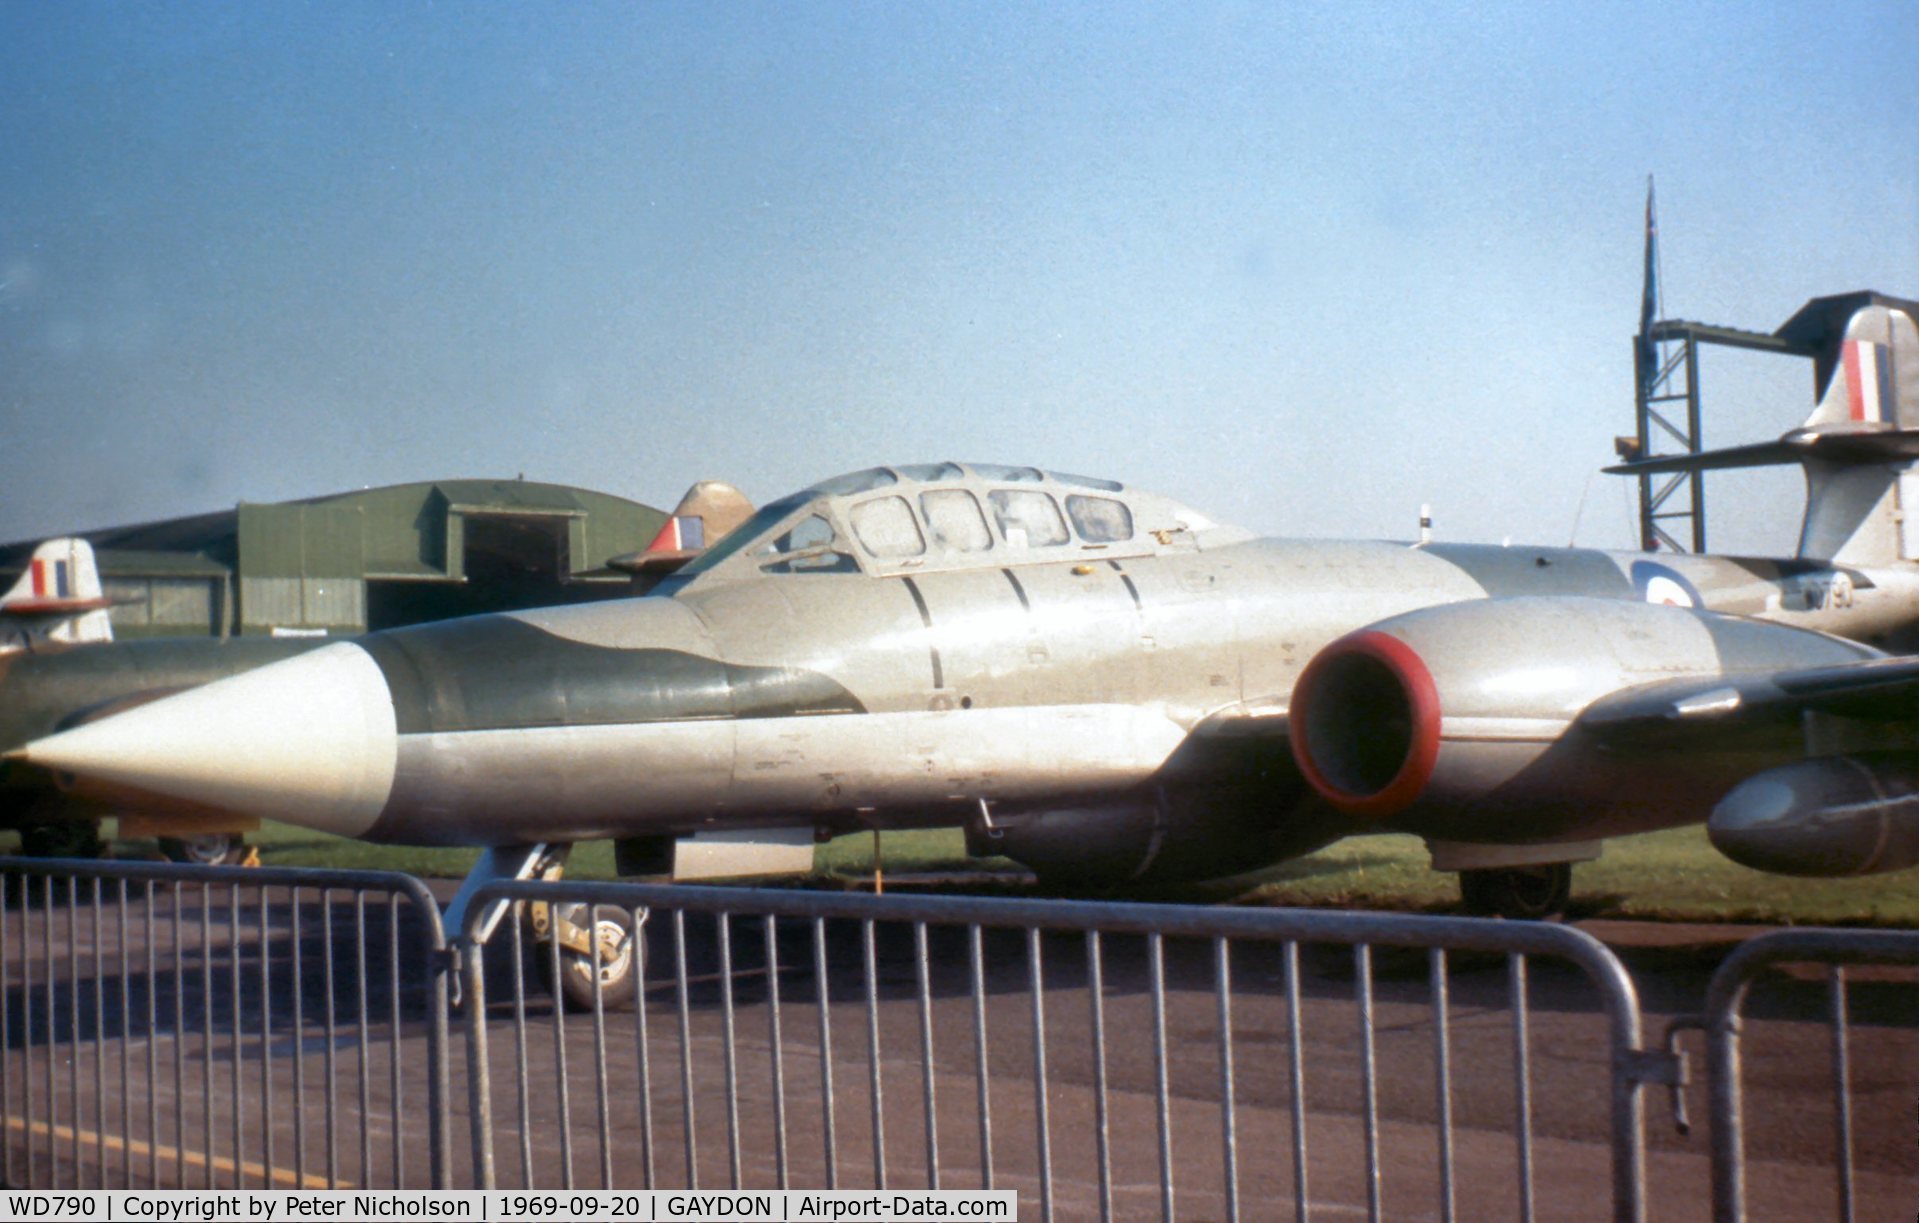 WD790, 1952 Gloster Meteor NF.11 C/N Not found WD790, Meteor NF.11 radar trials aircraft from the Royal Radar Establishment at Pershore on display at the 1969 Battle of Britain Airshow at RAF Gaydon.